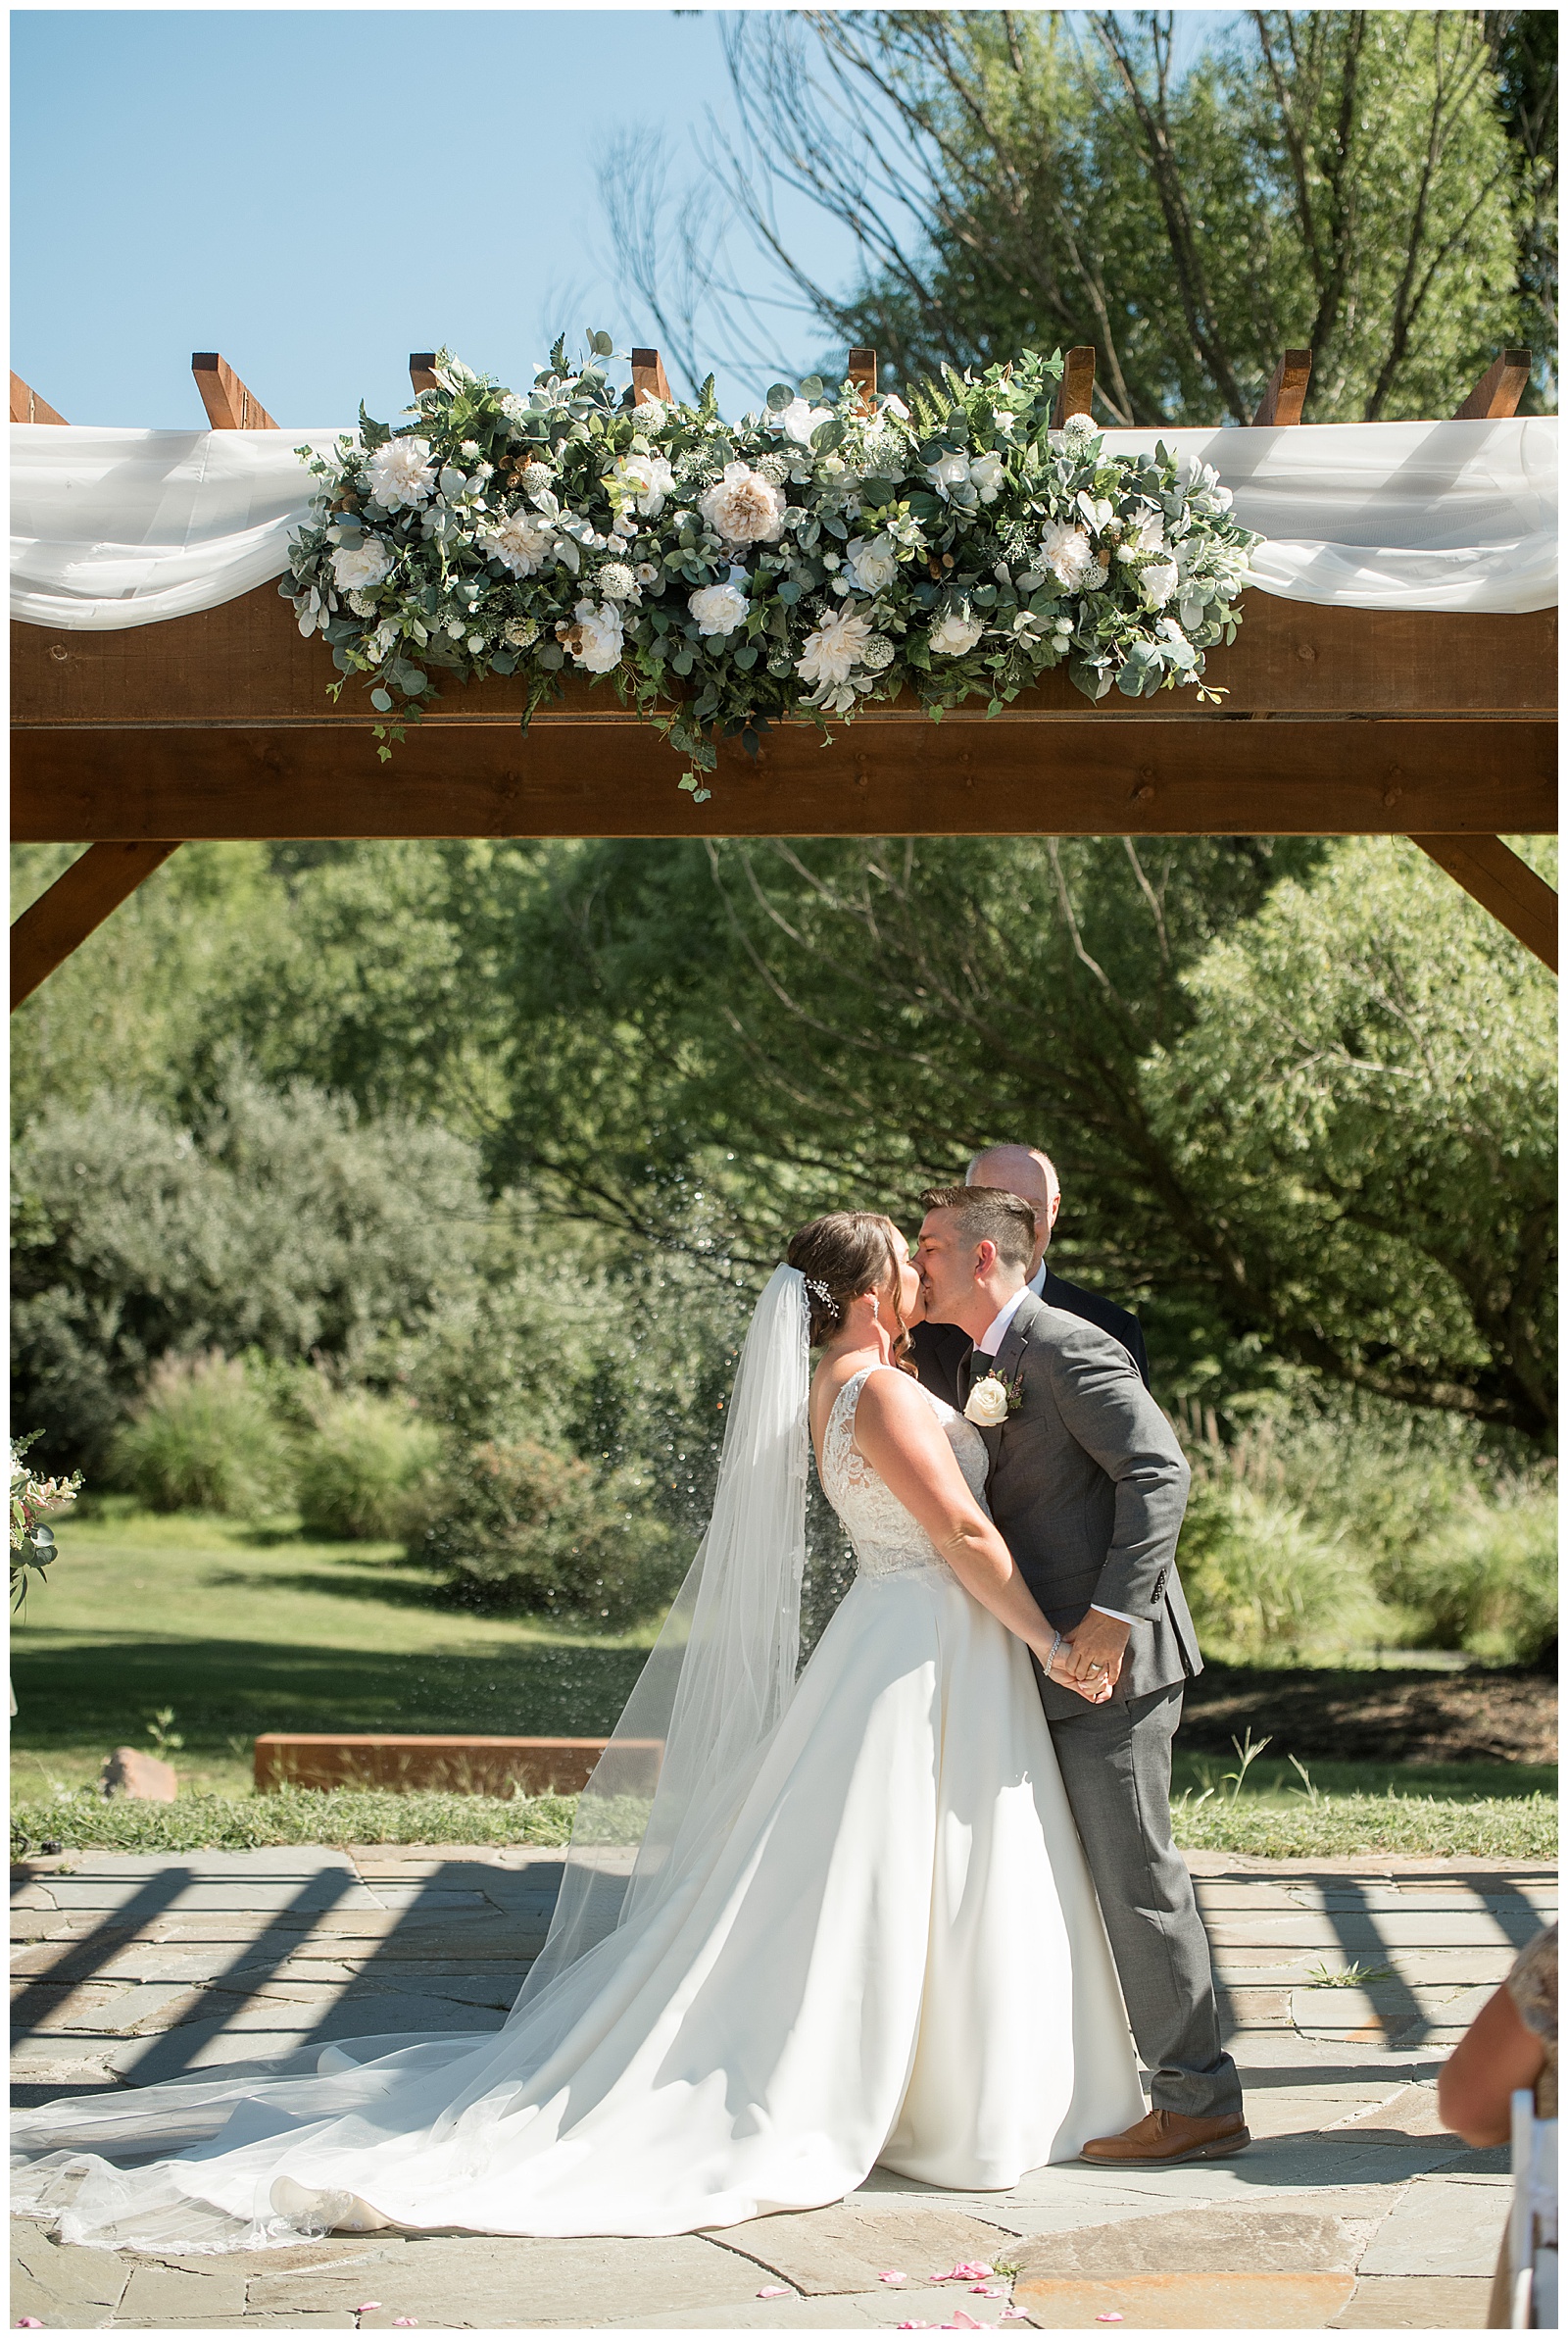 couple sharing their first kiss during outdoor wedding ceremony under wooden display with flowers and white linen at the manor at mountain view